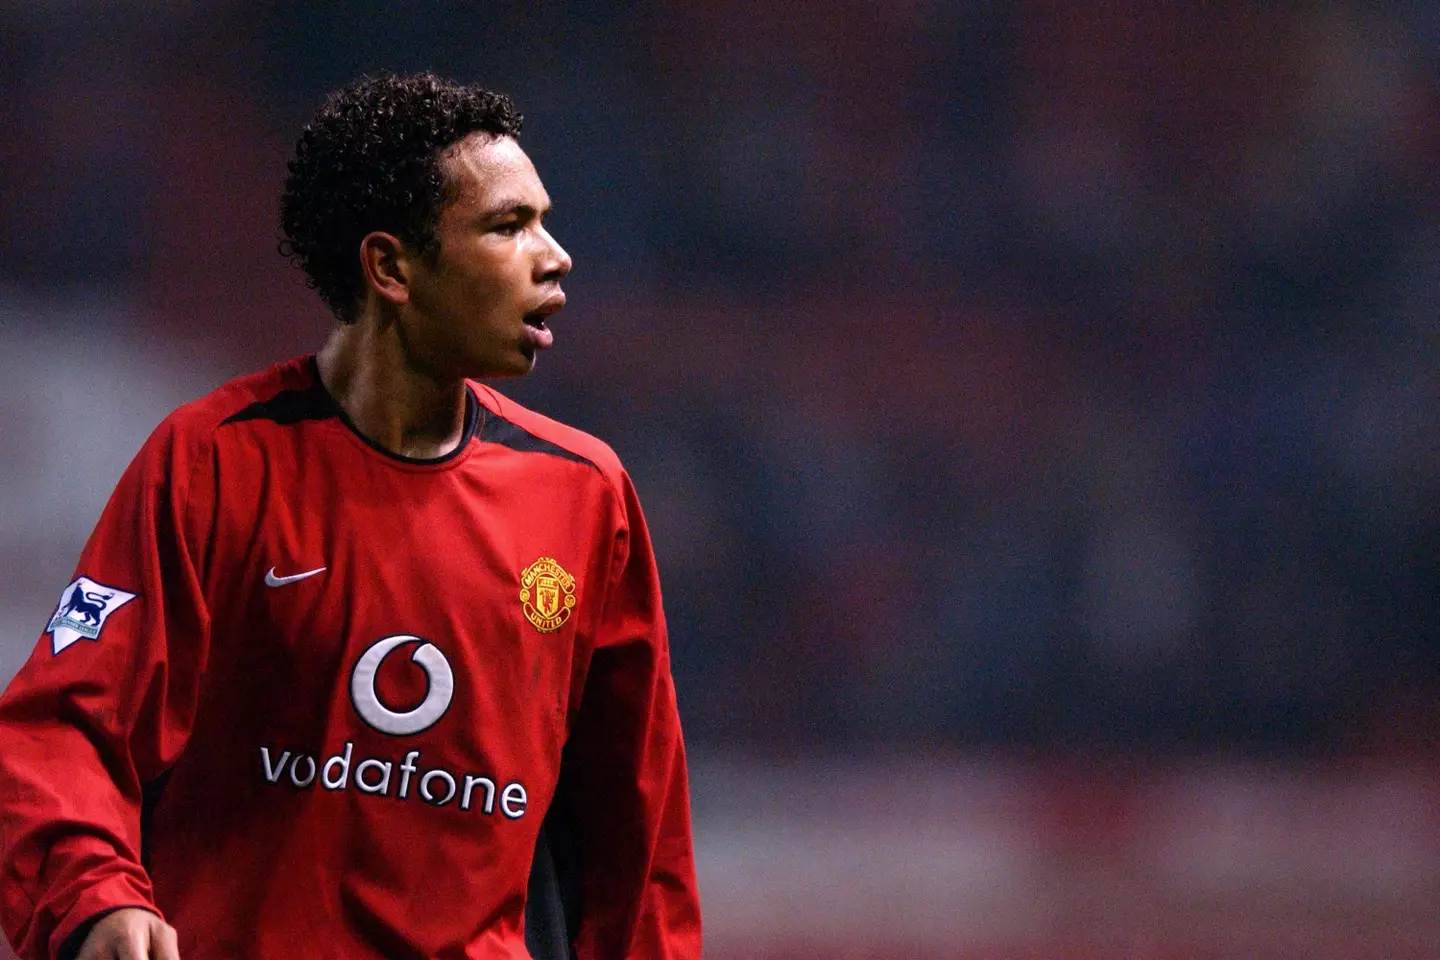 Kieran Richardson left Manchester United in 2007 and went on to play for the likes of Sunderland, Fulham, Aston Villa and Cardiff City.